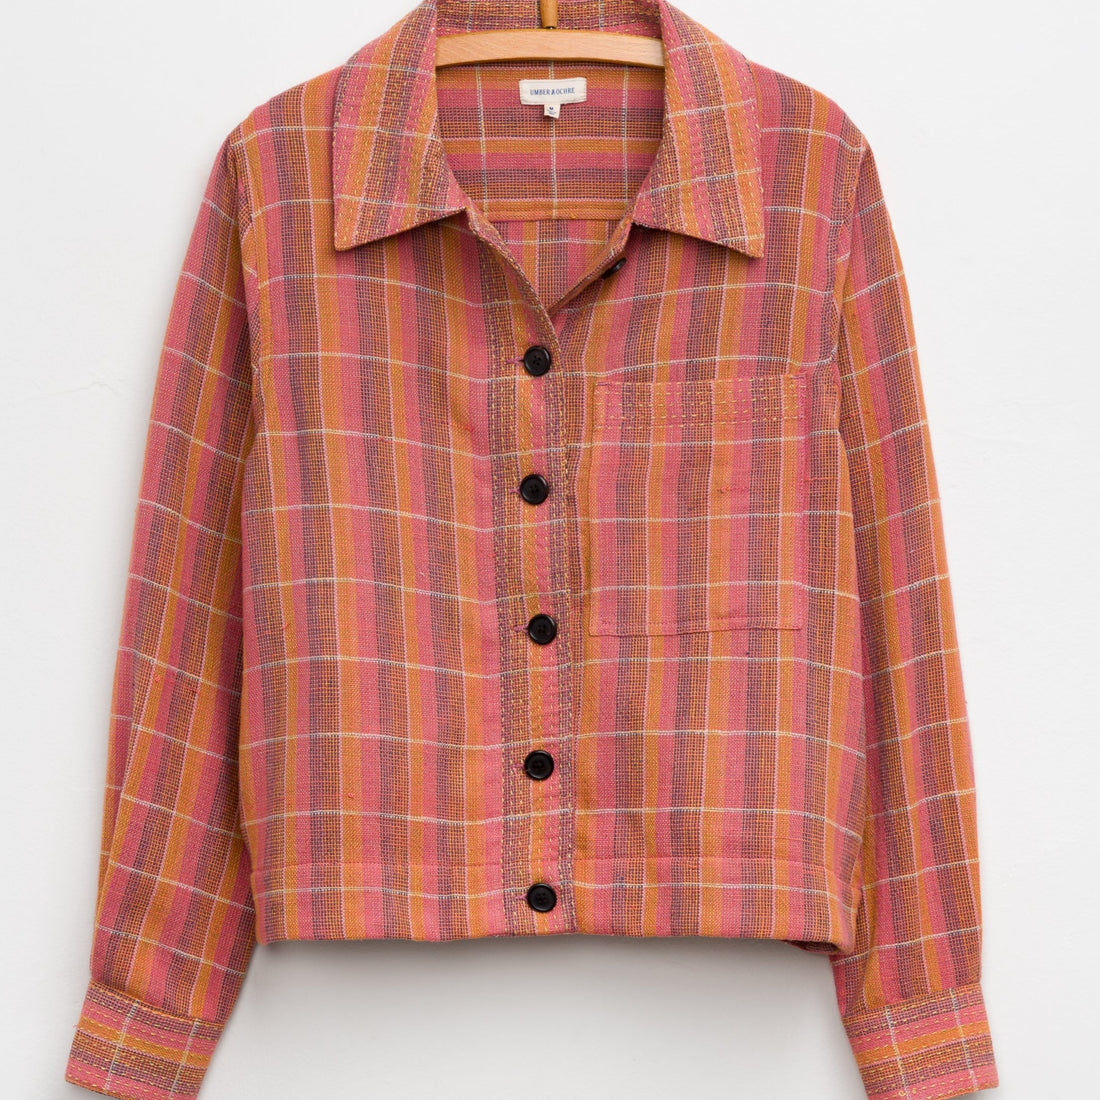 Padma Jacket in Nubby Cotton Sunset Plaid